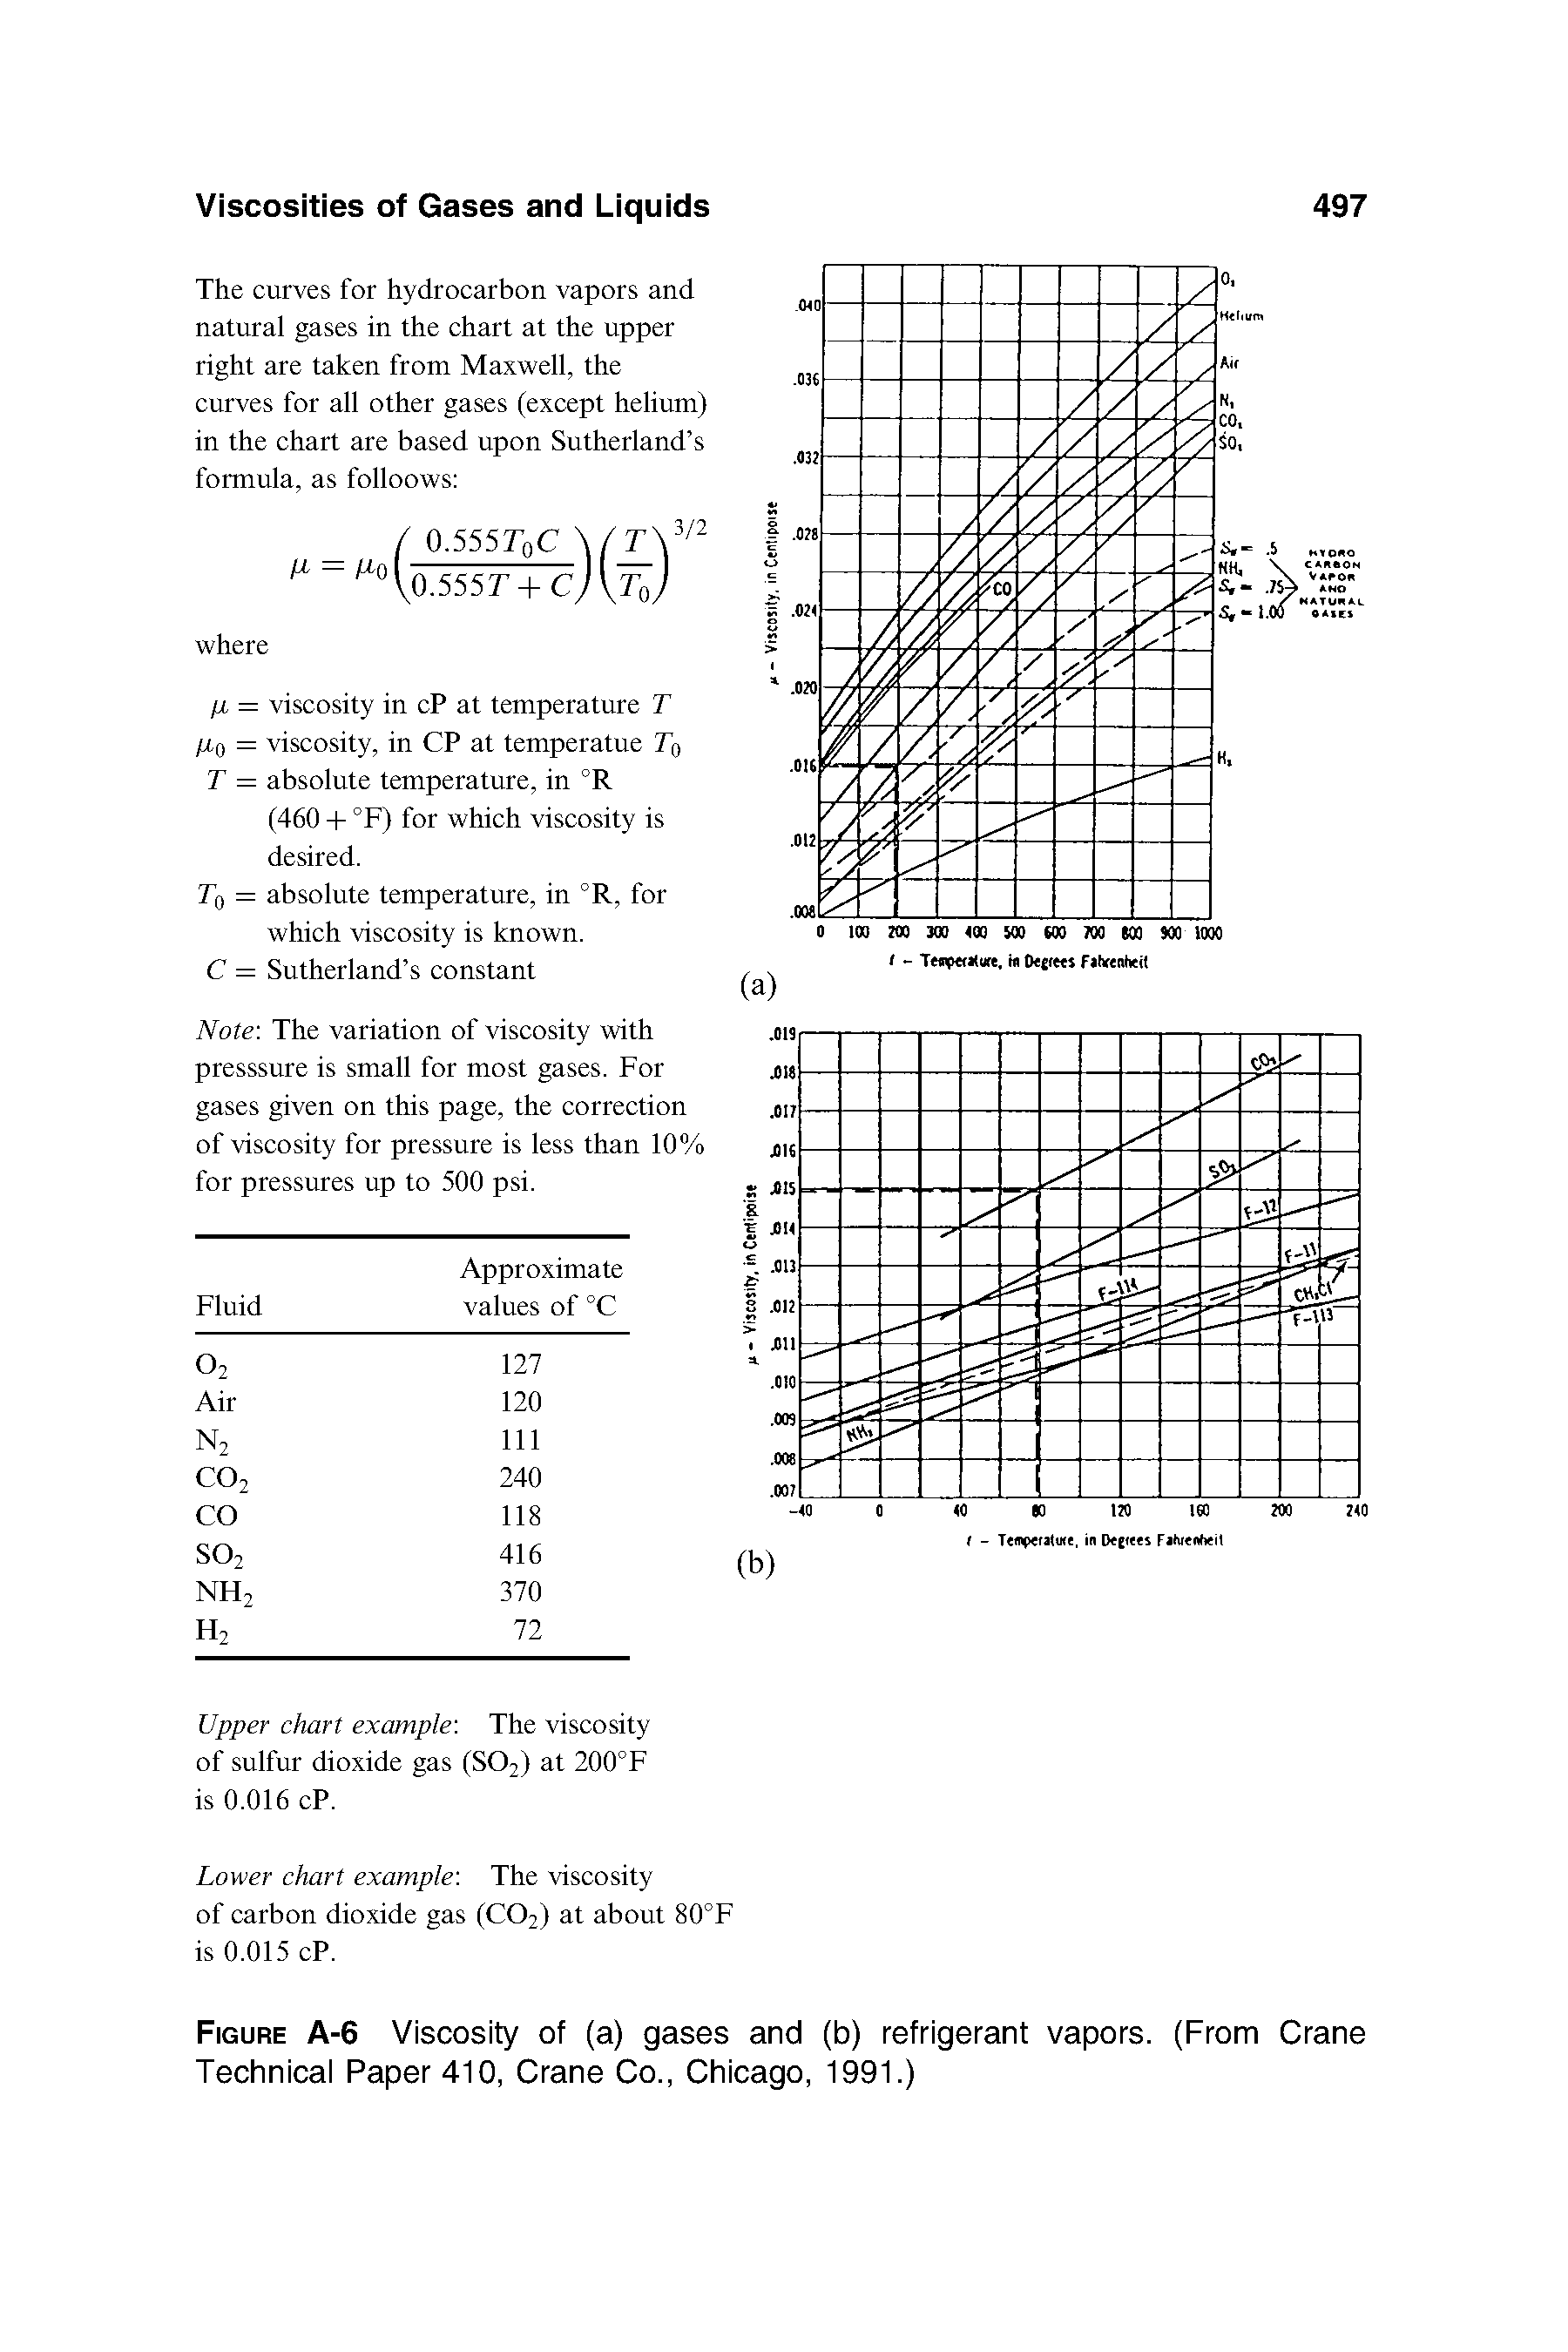 Figure A-6 Viscosity of (a) gases and (b) refrigerant vapors. (From Crane Technical Paper 410, Crane Co., Chicago, 1991.)...